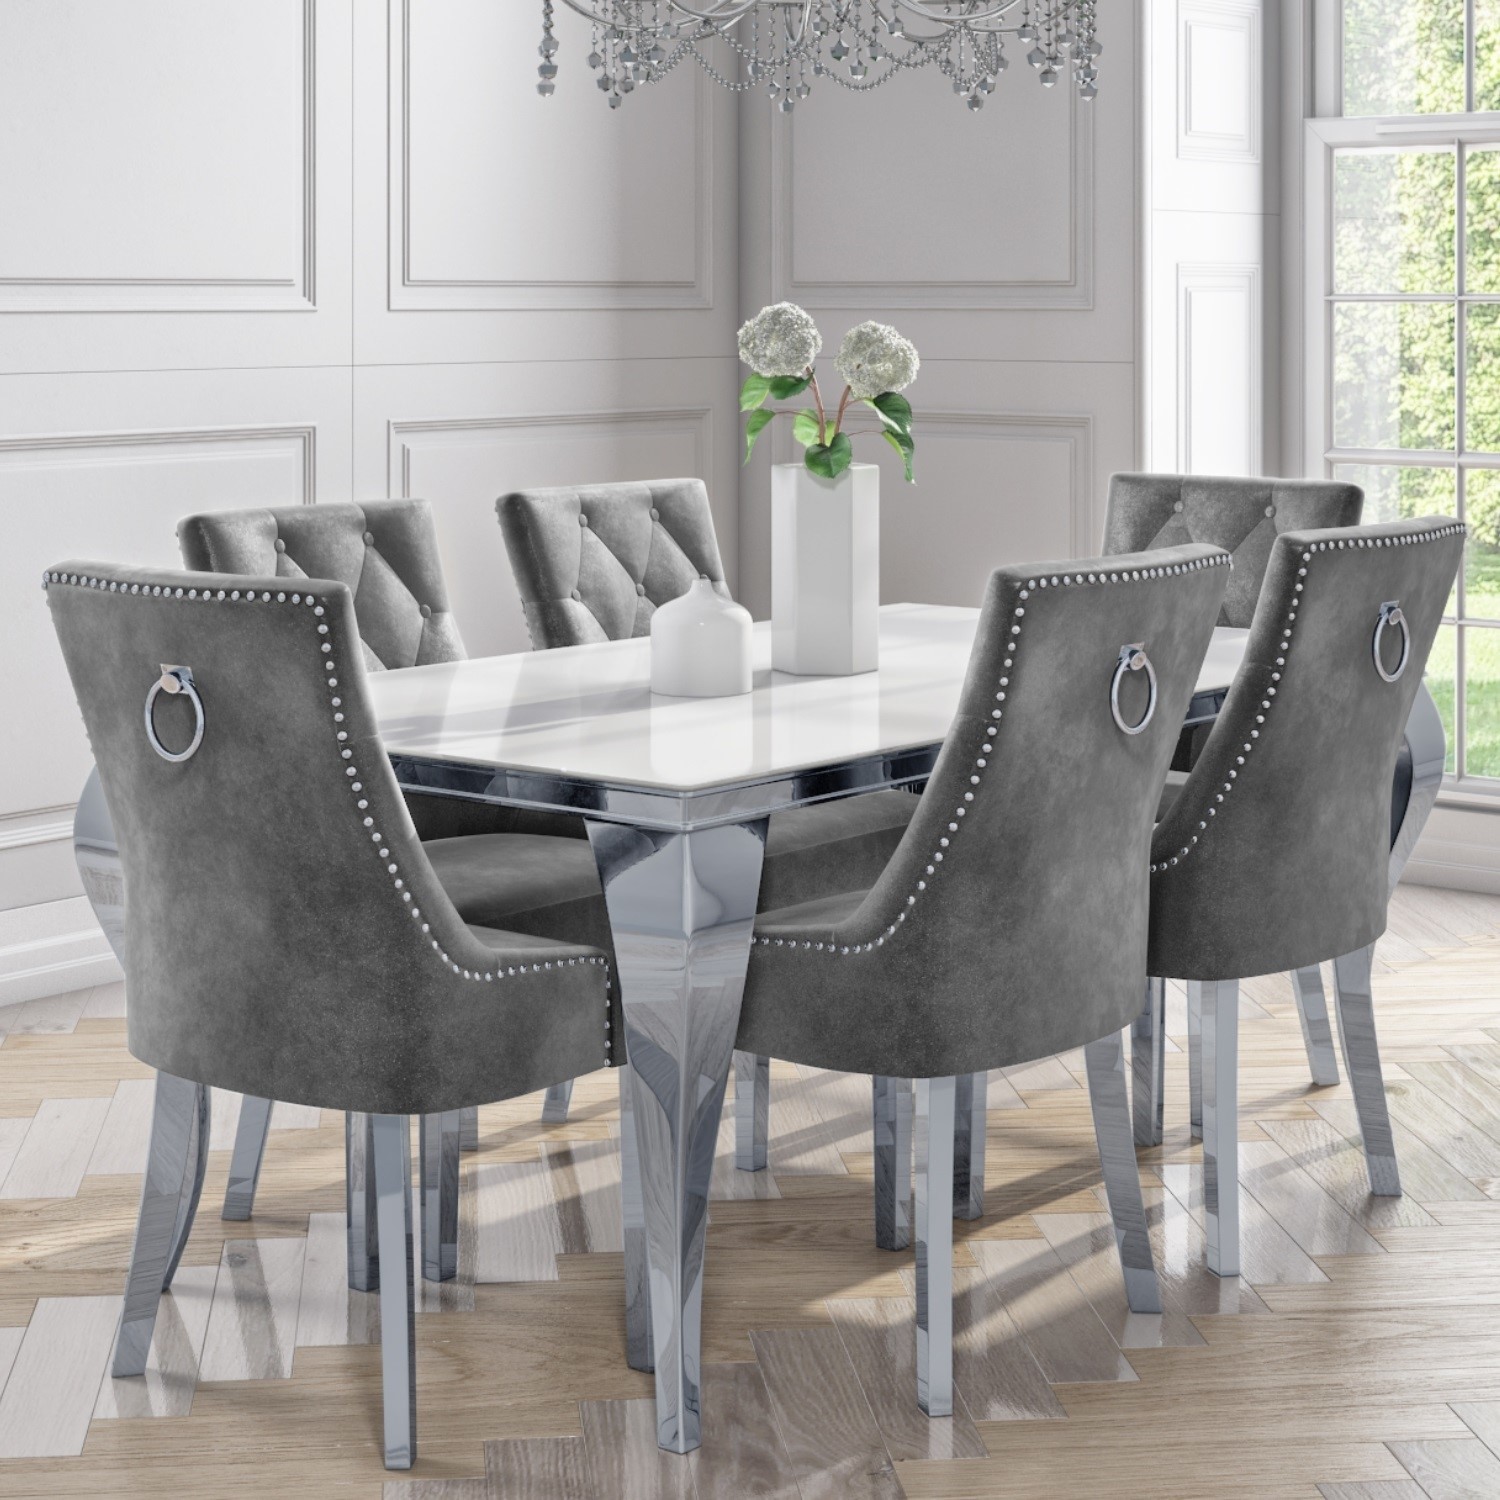 6 Seater Dining Set With White And, 6 Seater Round Dining Table And Chairs